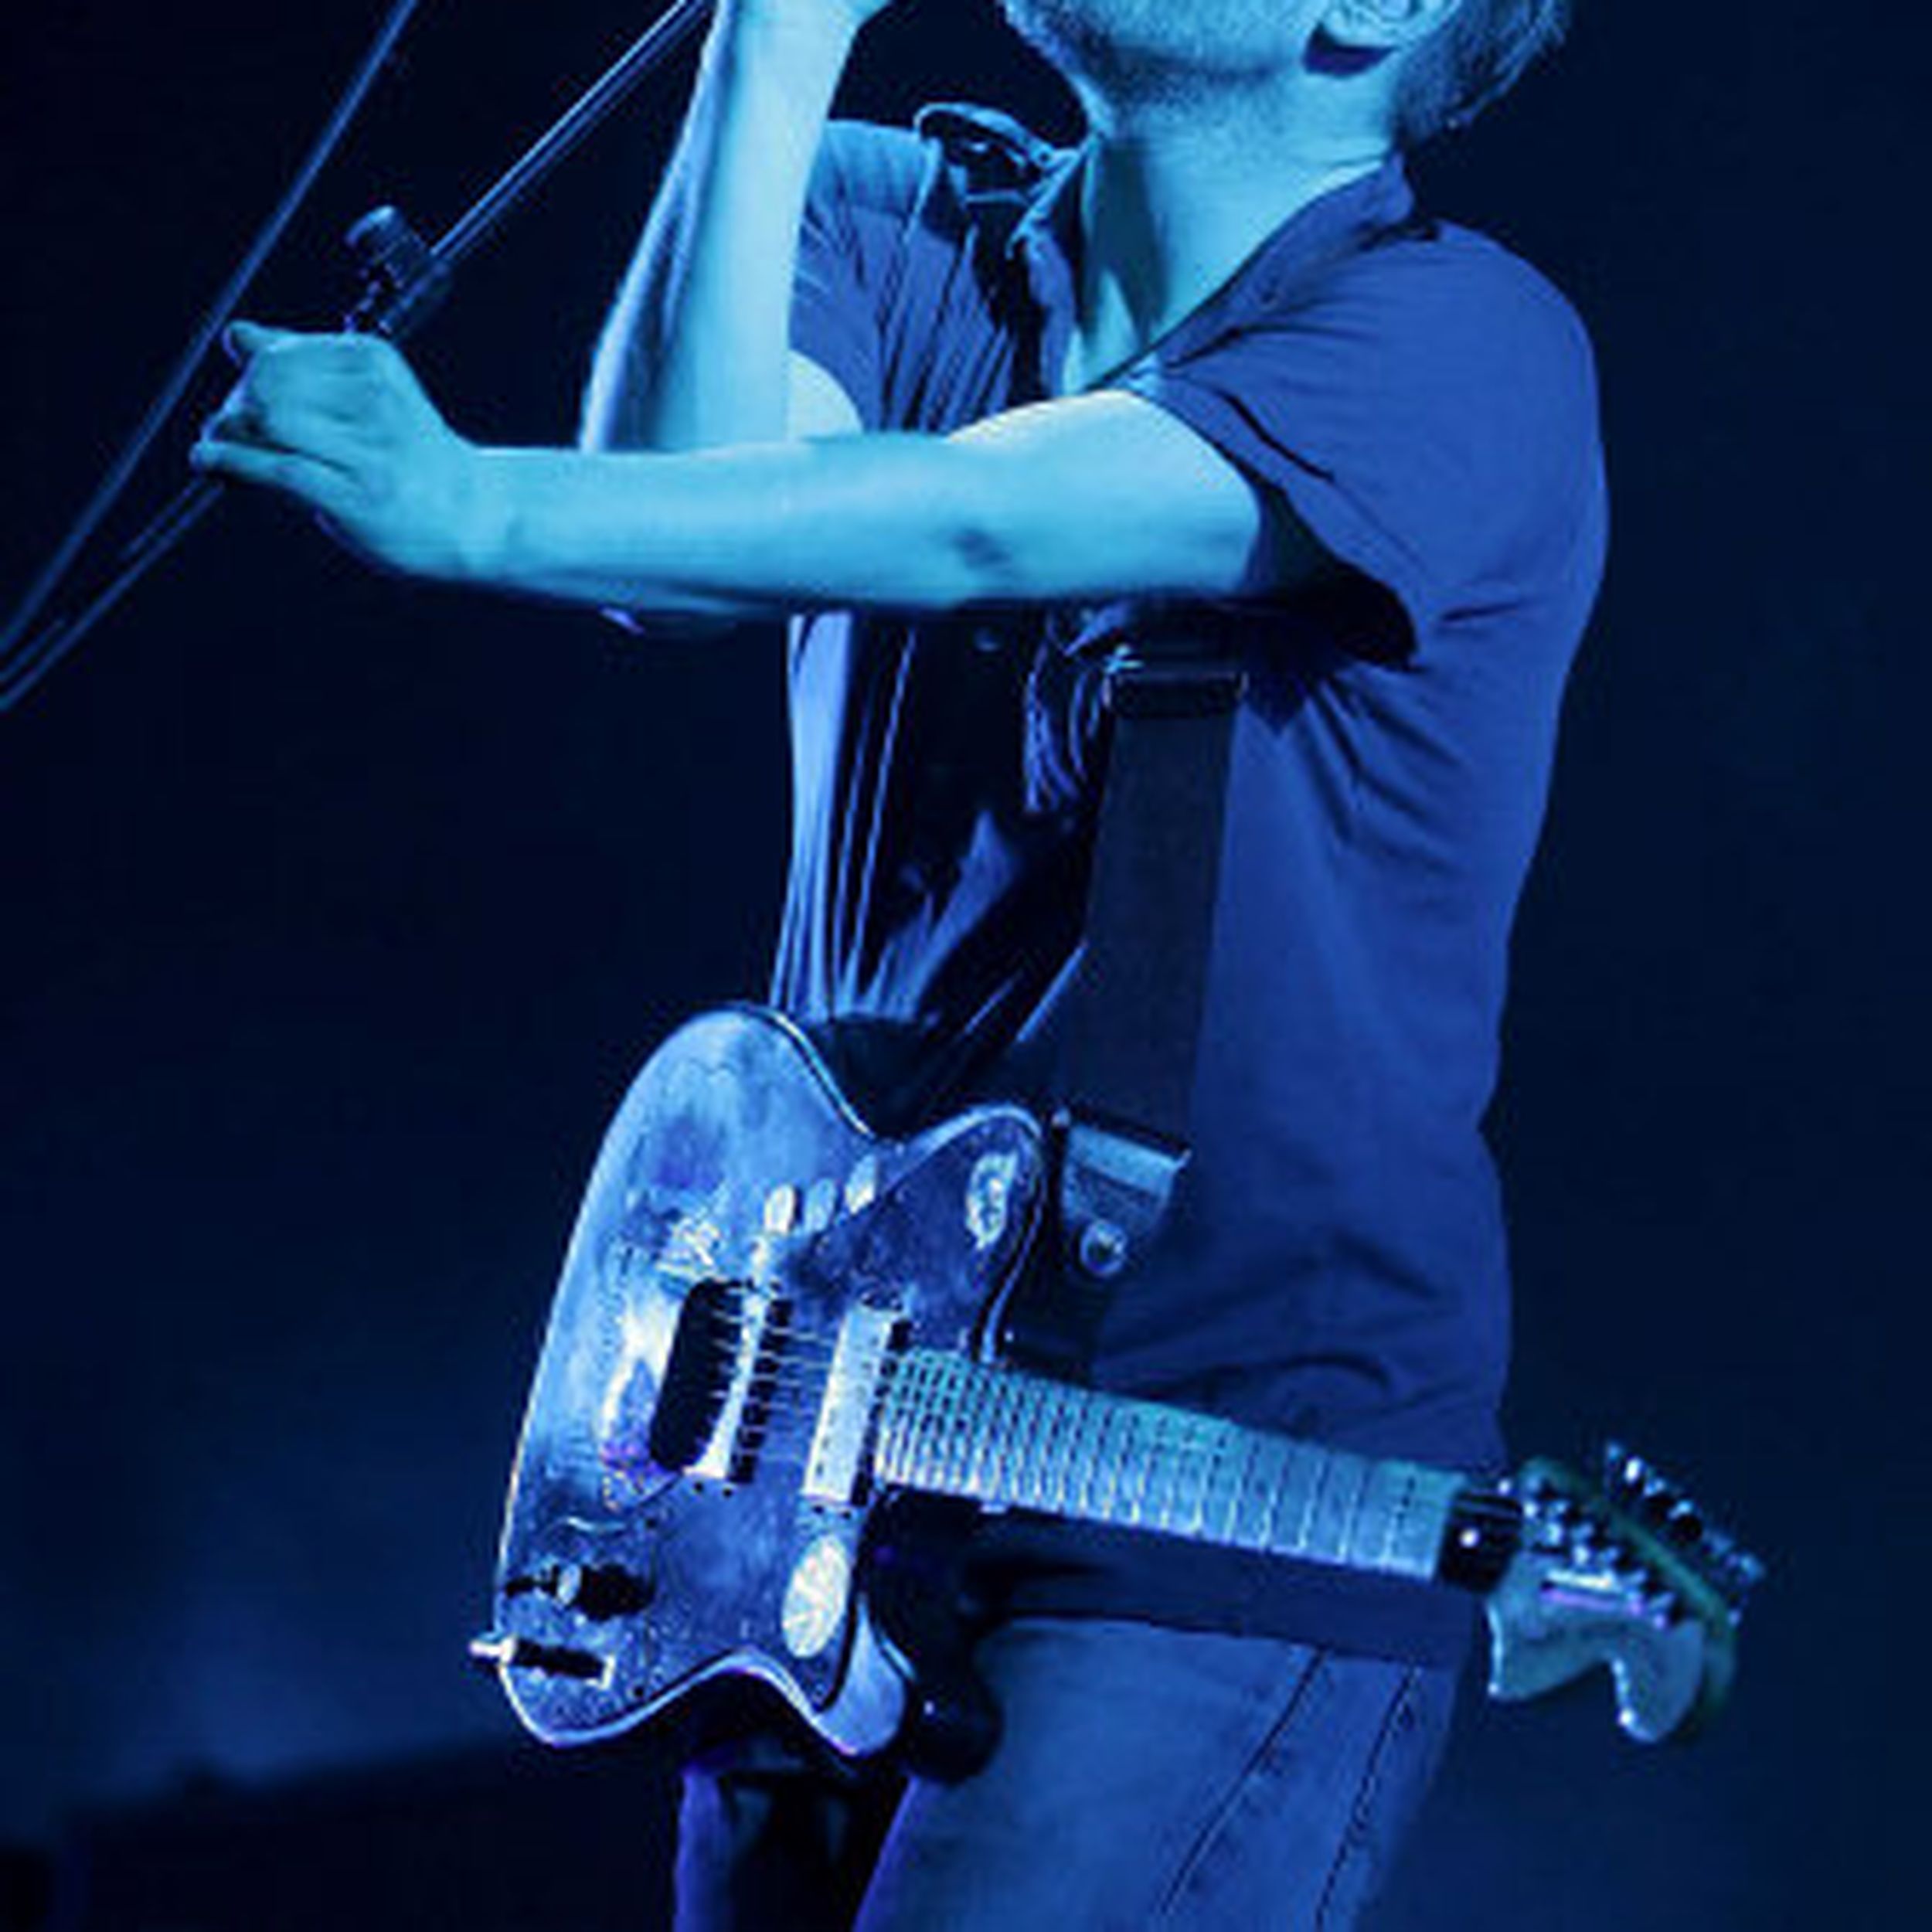 Radiohead singer finds new freedom | The Spokesman-Review